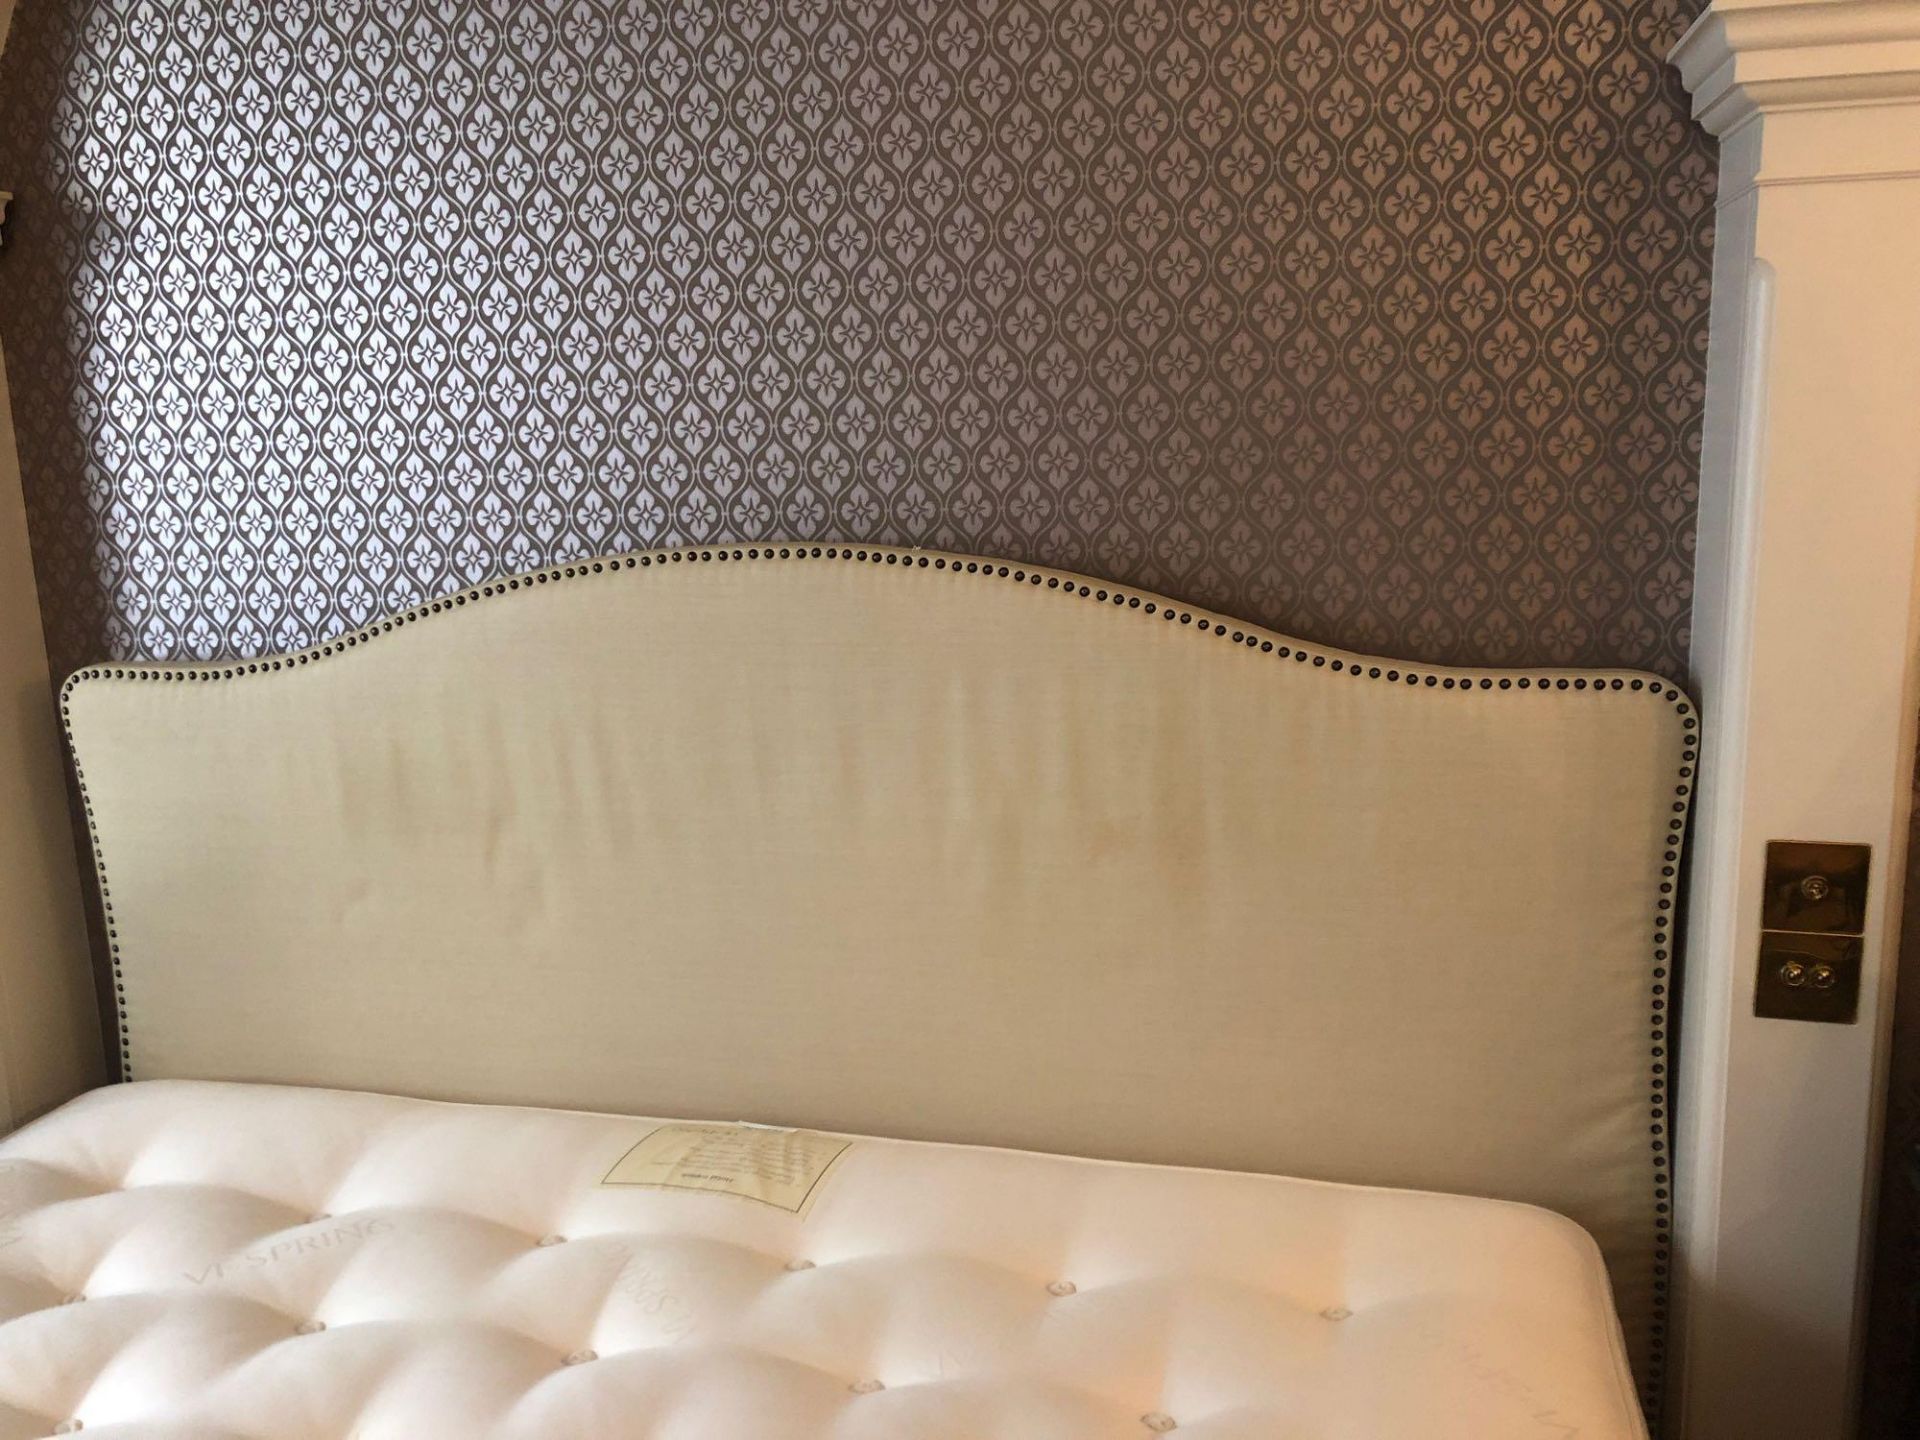 Headboard, Handcrafted With Nail Trim And Padded Textured Woven Upholstery ( Room 233)